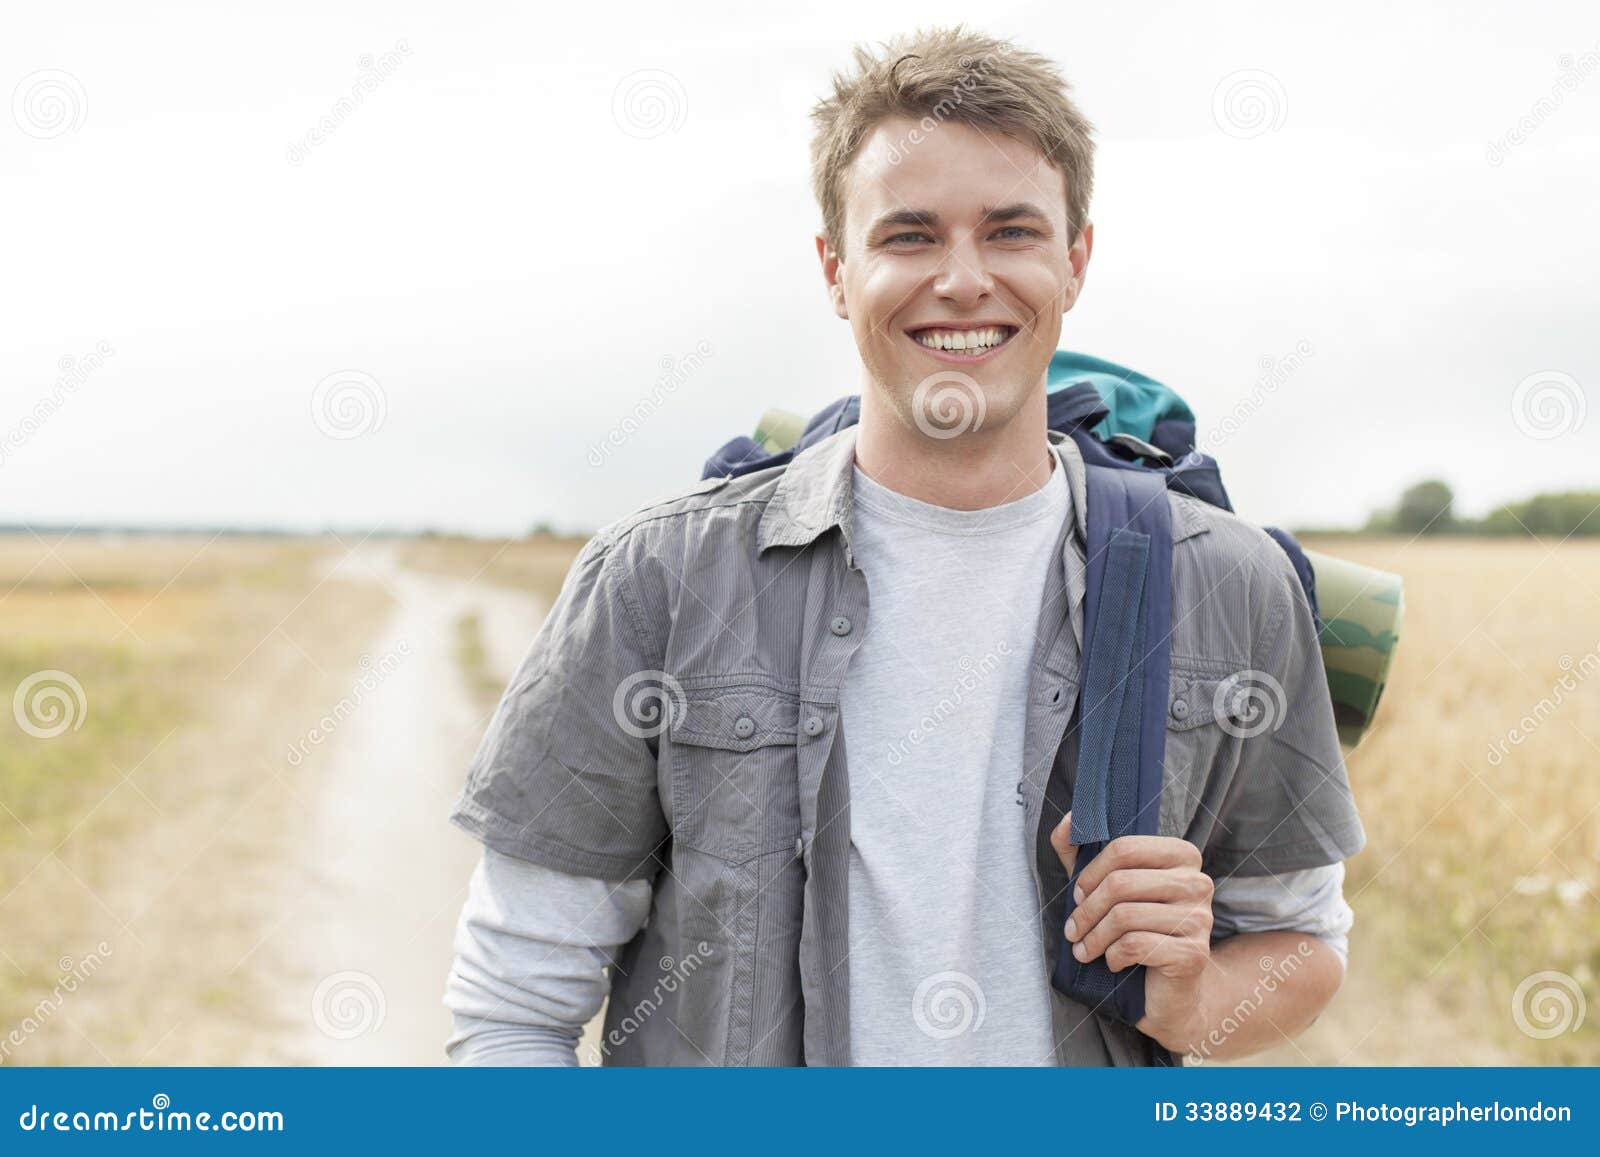 portrait of happy male hiker with backpack standing on field